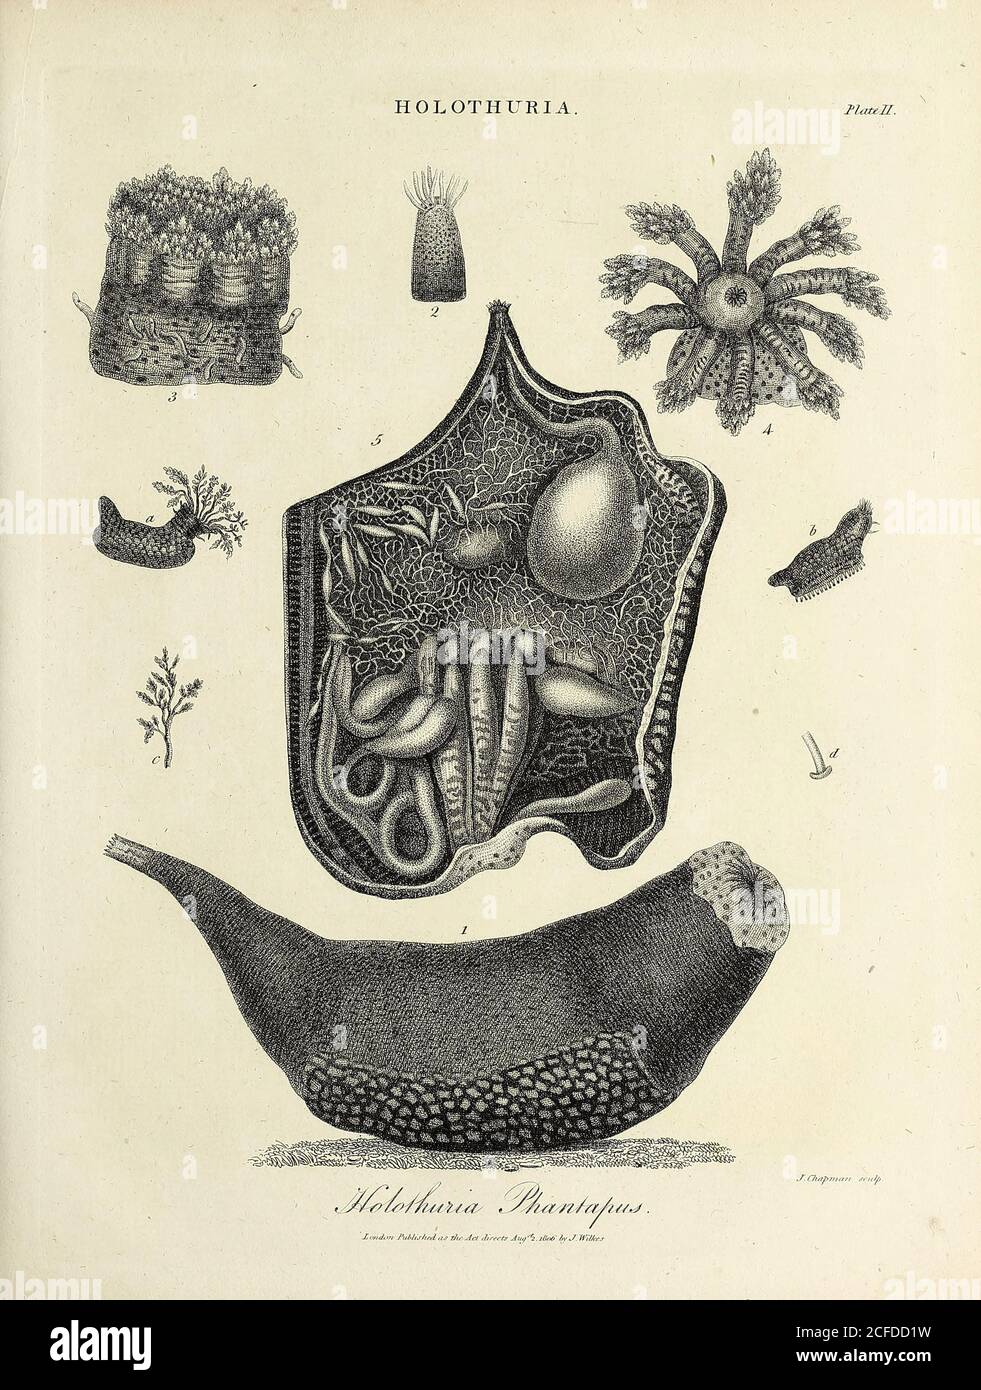 Holothuria [sea cucumbers] Holothuria Phantapus Copperplate engraving by J Chapman, From the Encyclopaedia Londinensis or, Universal dictionary of arts, sciences, and literature; Volume X;  Edited by Wilkes, John. Published in London in 1811 Stock Photo